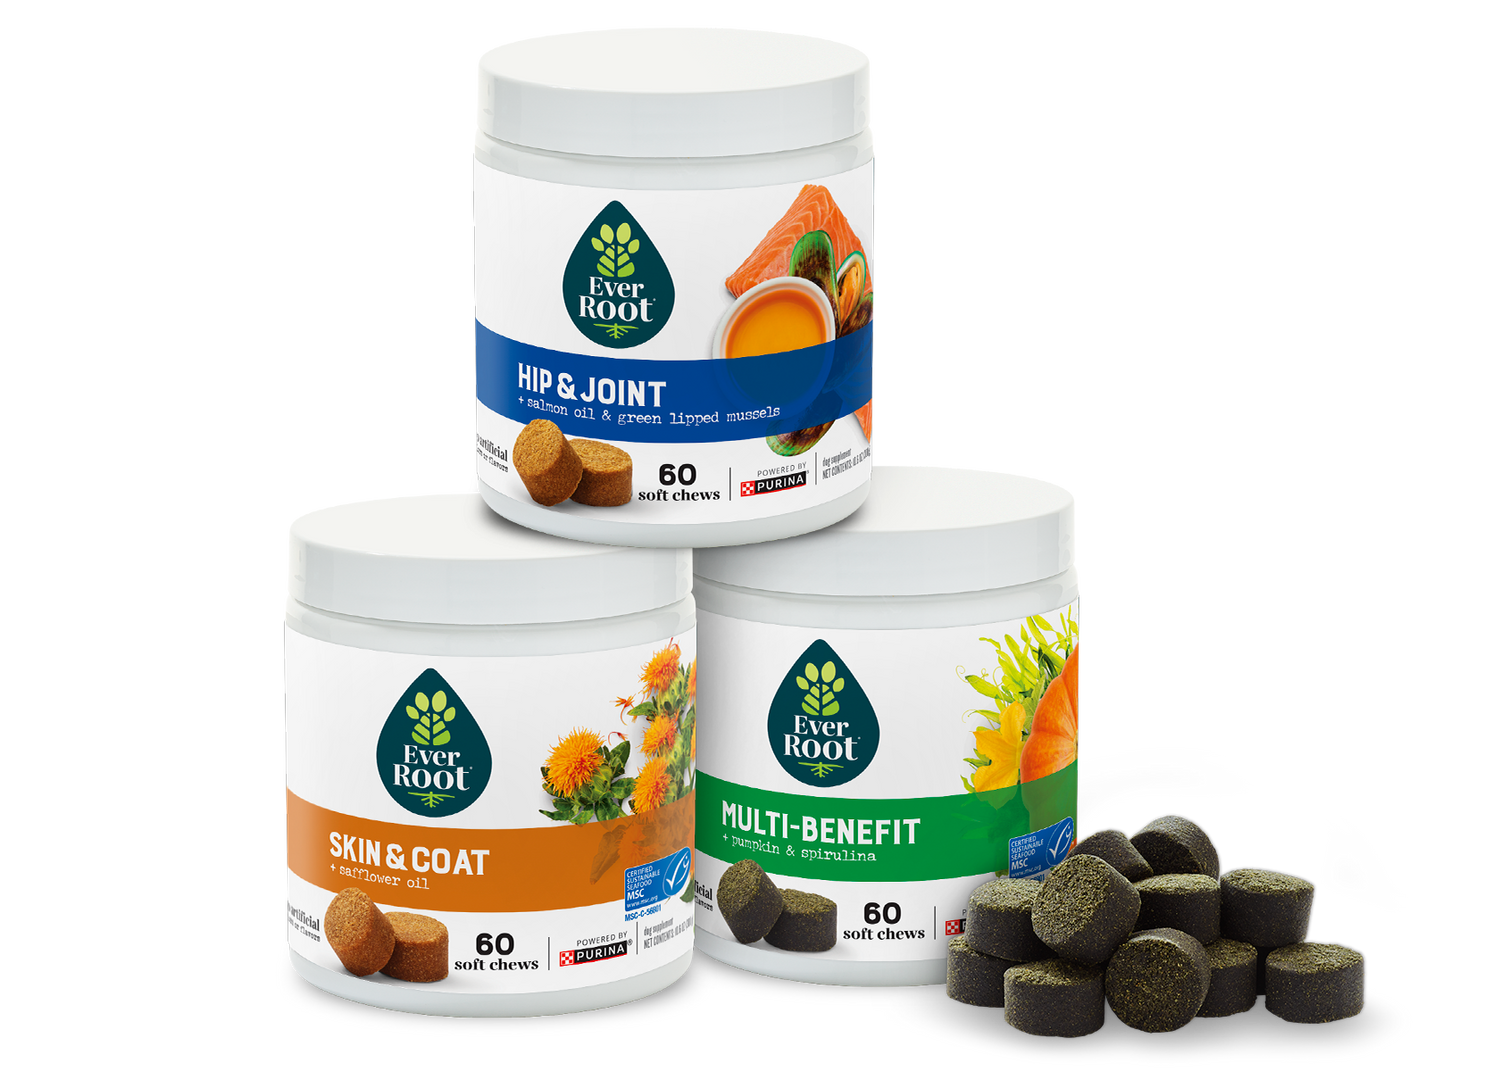 EverRoot Soft Chew product line up - Skin and Coat, Hip and Joint, and Multi-benefit